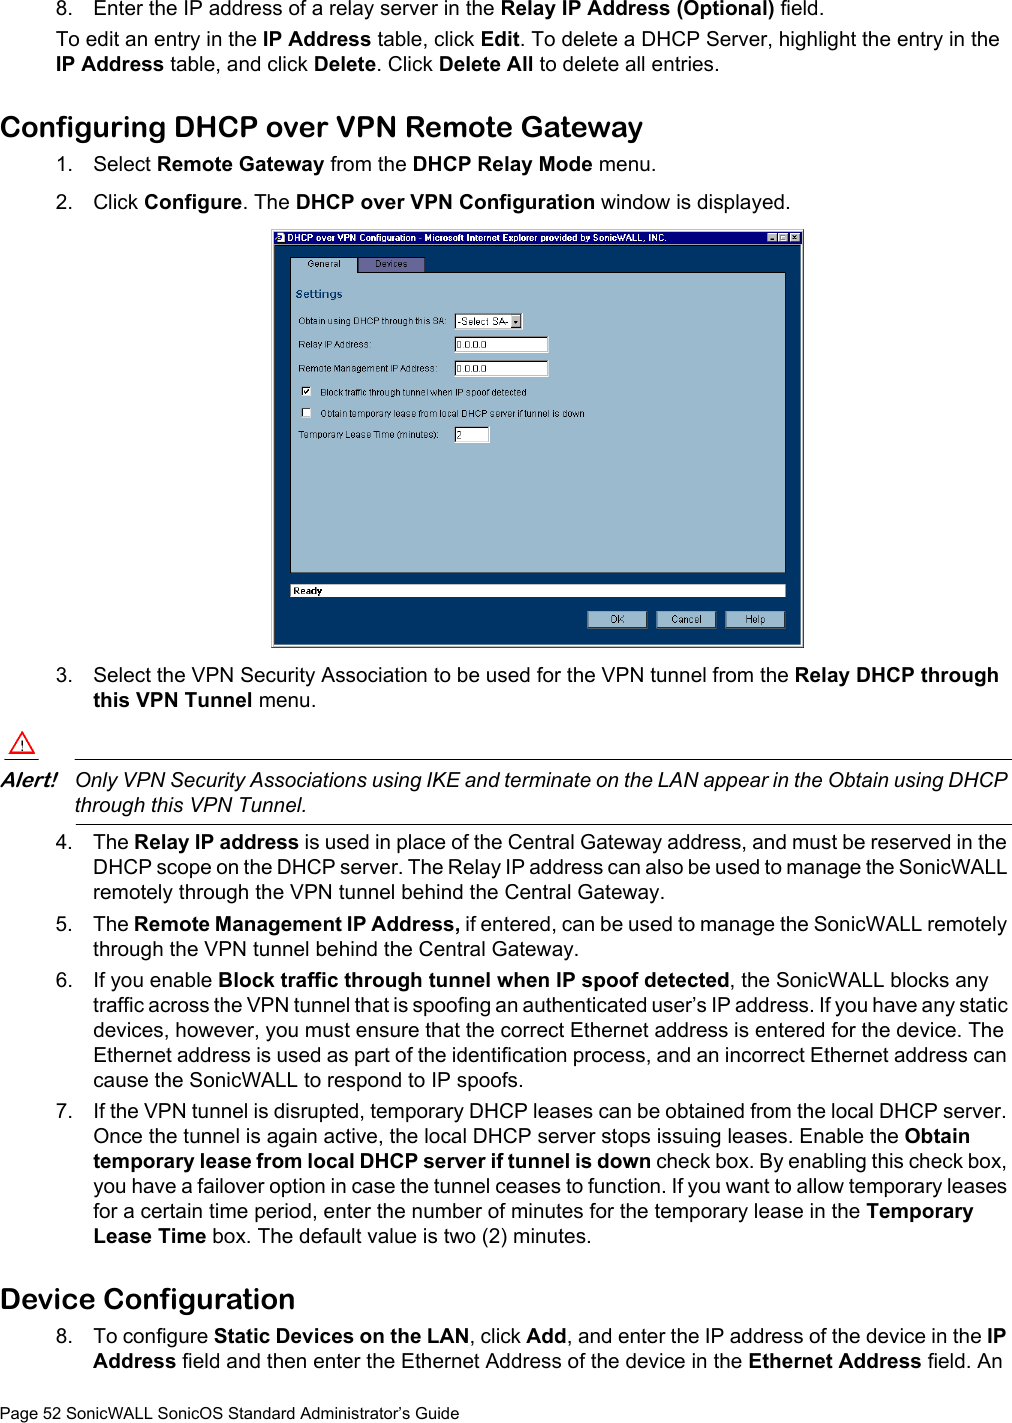 Page 52 SonicWALL SonicOS Standard Administrator’s Guide8. Enter the IP address of a relay server in the Relay IP Address (Optional) field. To edit an entry in the IP Address table, click Edit. To delete a DHCP Server, highlight the entry in the IP Address table, and click Delete. Click Delete All to delete all entries. Configuring DHCP over VPN Remote Gateway1. Select Remote Gateway from the DHCP Relay Mode menu.2. Click Configure. The DHCP over VPN Configuration window is displayed.3. Select the VPN Security Association to be used for the VPN tunnel from the Relay DHCP through this VPN Tunnel menu. Alert!Only VPN Security Associations using IKE and terminate on the LAN appear in the Obtain using DHCP through this VPN Tunnel. 4. The Relay IP address is used in place of the Central Gateway address, and must be reserved in the DHCP scope on the DHCP server. The Relay IP address can also be used to manage the SonicWALL remotely through the VPN tunnel behind the Central Gateway.5. The Remote Management IP Address, if entered, can be used to manage the SonicWALL remotely through the VPN tunnel behind the Central Gateway.6. If you enable Block traffic through tunnel when IP spoof detected, the SonicWALL blocks any traffic across the VPN tunnel that is spoofing an authenticated user’s IP address. If you have any static devices, however, you must ensure that the correct Ethernet address is entered for the device. The Ethernet address is used as part of the identification process, and an incorrect Ethernet address can cause the SonicWALL to respond to IP spoofs.7. If the VPN tunnel is disrupted, temporary DHCP leases can be obtained from the local DHCP server. Once the tunnel is again active, the local DHCP server stops issuing leases. Enable the Obtain temporary lease from local DHCP server if tunnel is down check box. By enabling this check box, you have a failover option in case the tunnel ceases to function. If you want to allow temporary leases for a certain time period, enter the number of minutes for the temporary lease in the Temporary Lease Time box. The default value is two (2) minutes. Device Configuration 8. To configure Static Devices on the LAN, click Add, and enter the IP address of the device in the IP Address field and then enter the Ethernet Address of the device in the Ethernet Address field. An 